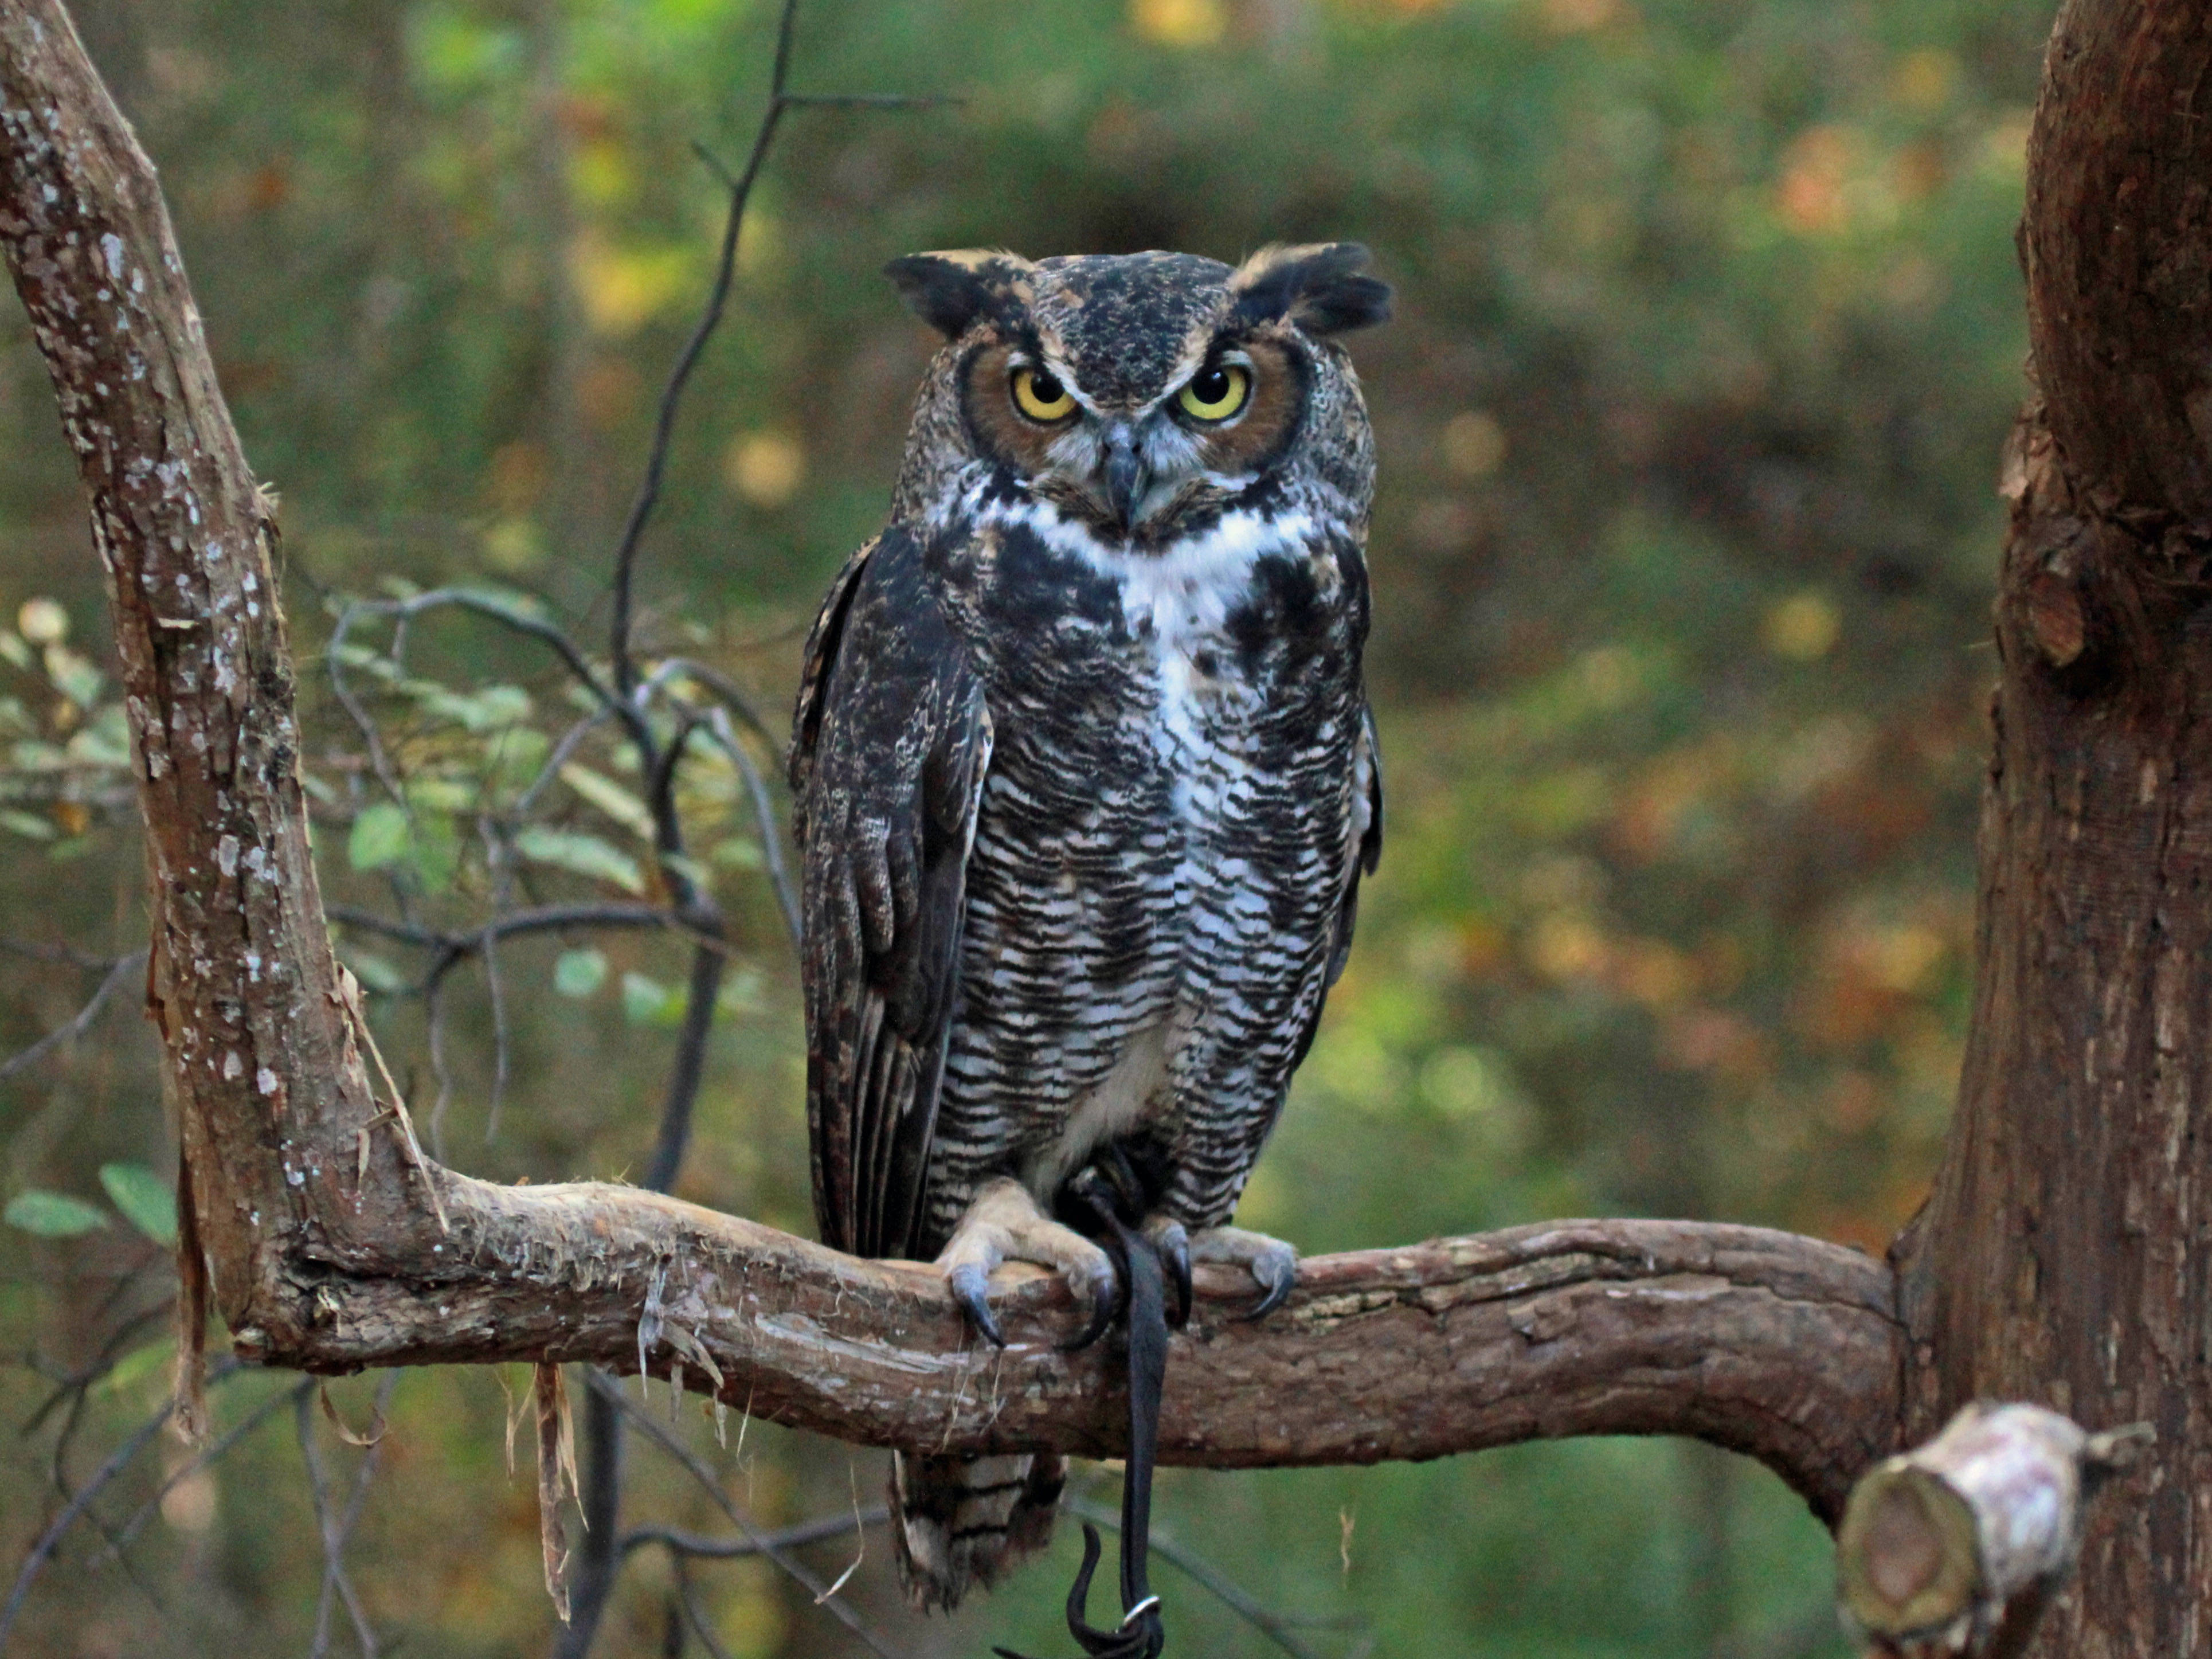 Great horned owl photo